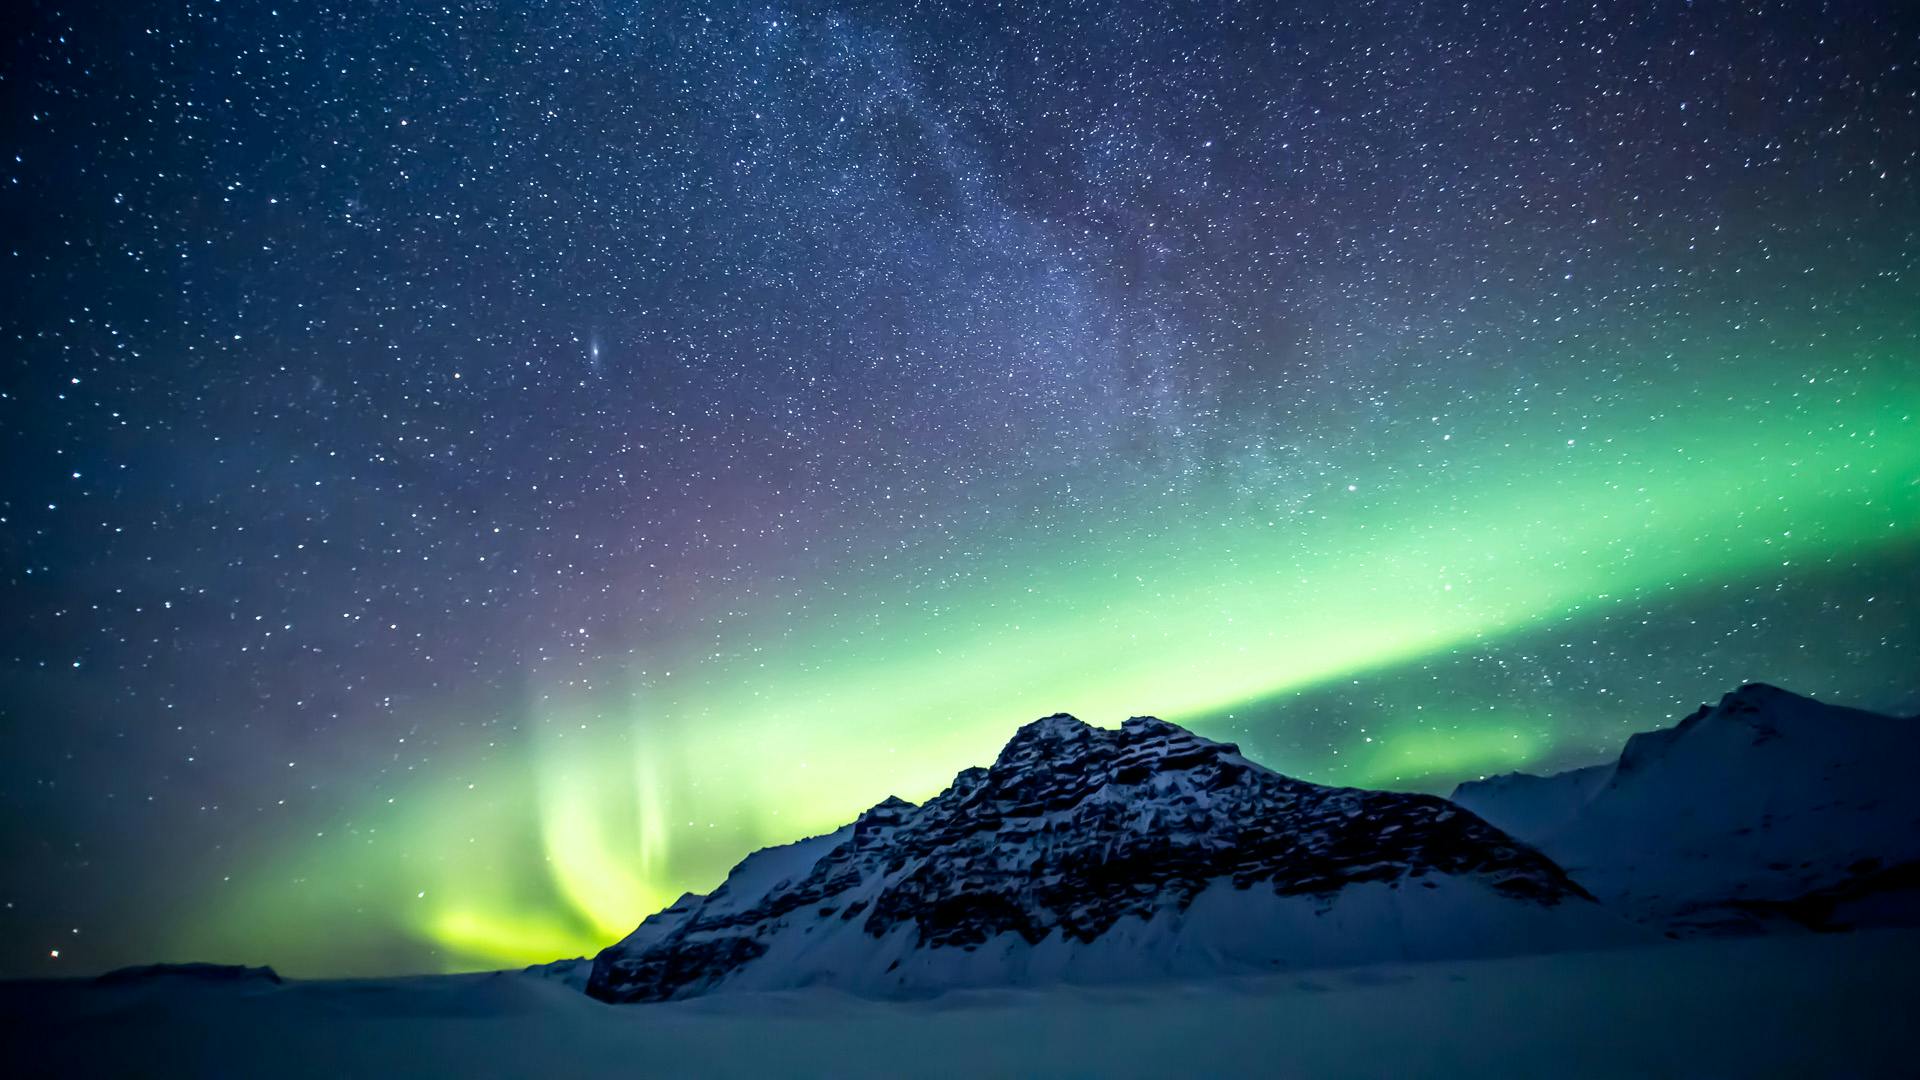 Mountain with a aurora borealis brightening up the sky.